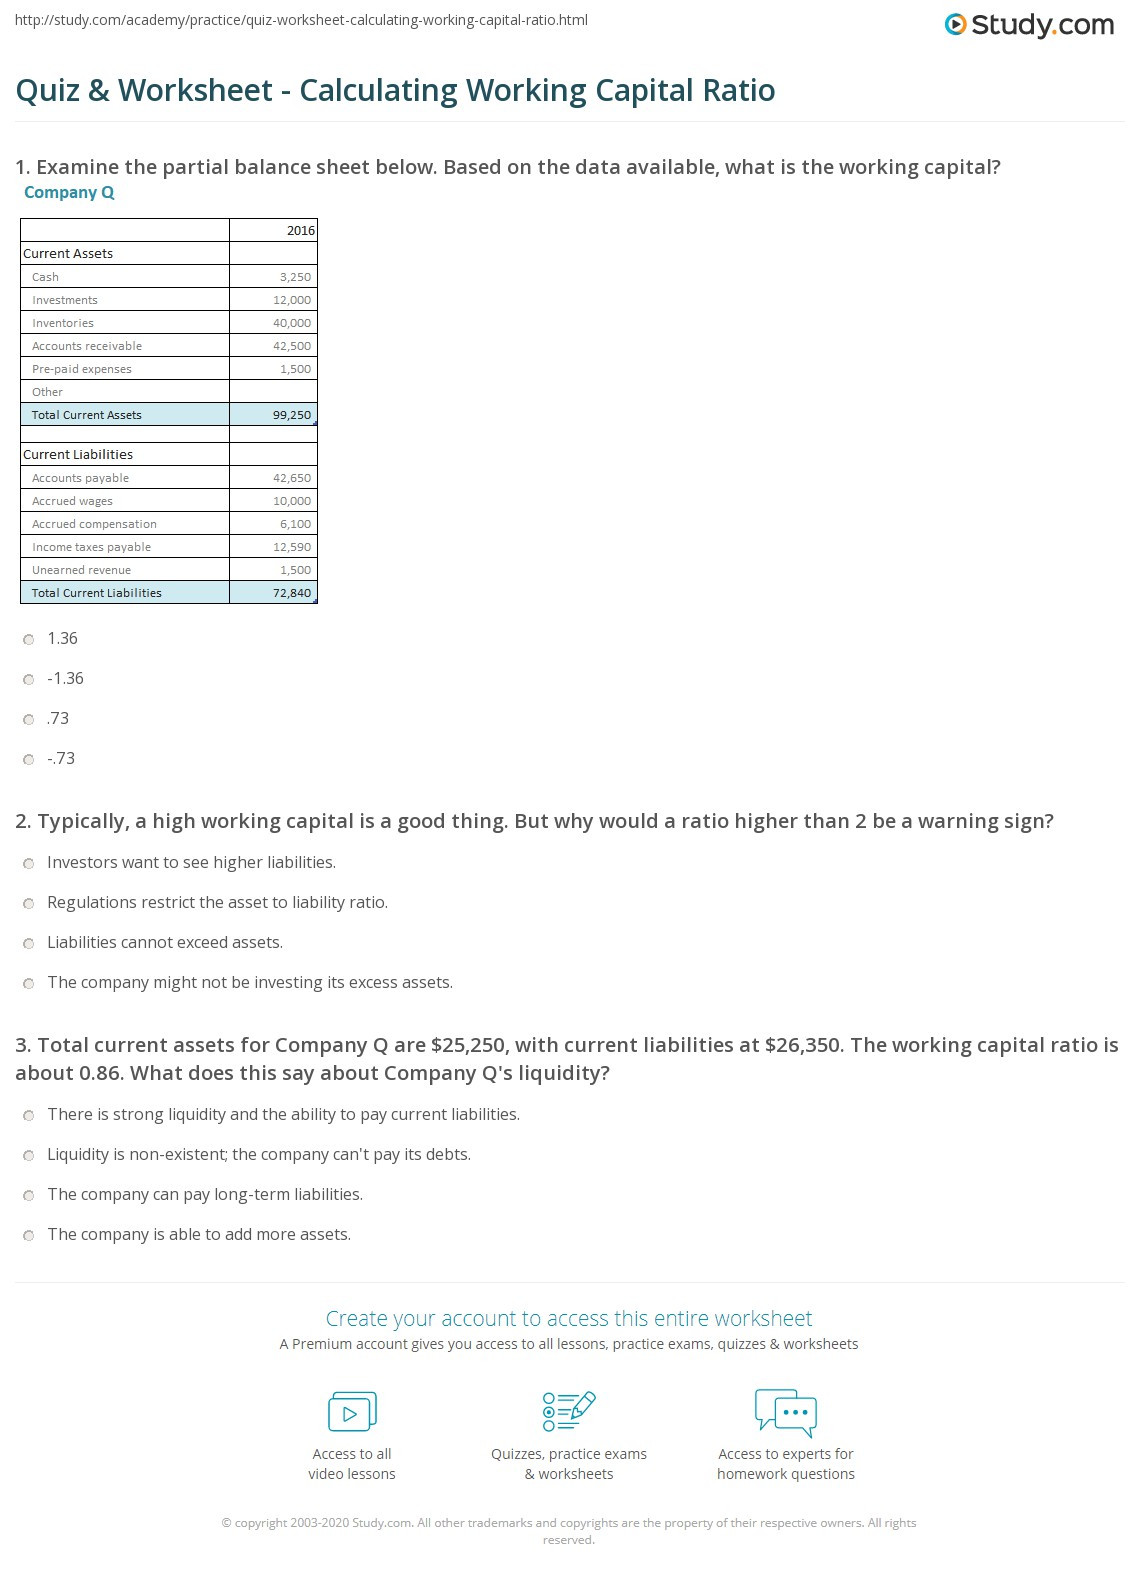 Assets and Liabilities Worksheet Quiz &amp; Worksheet Calculating Working Capital Ratio